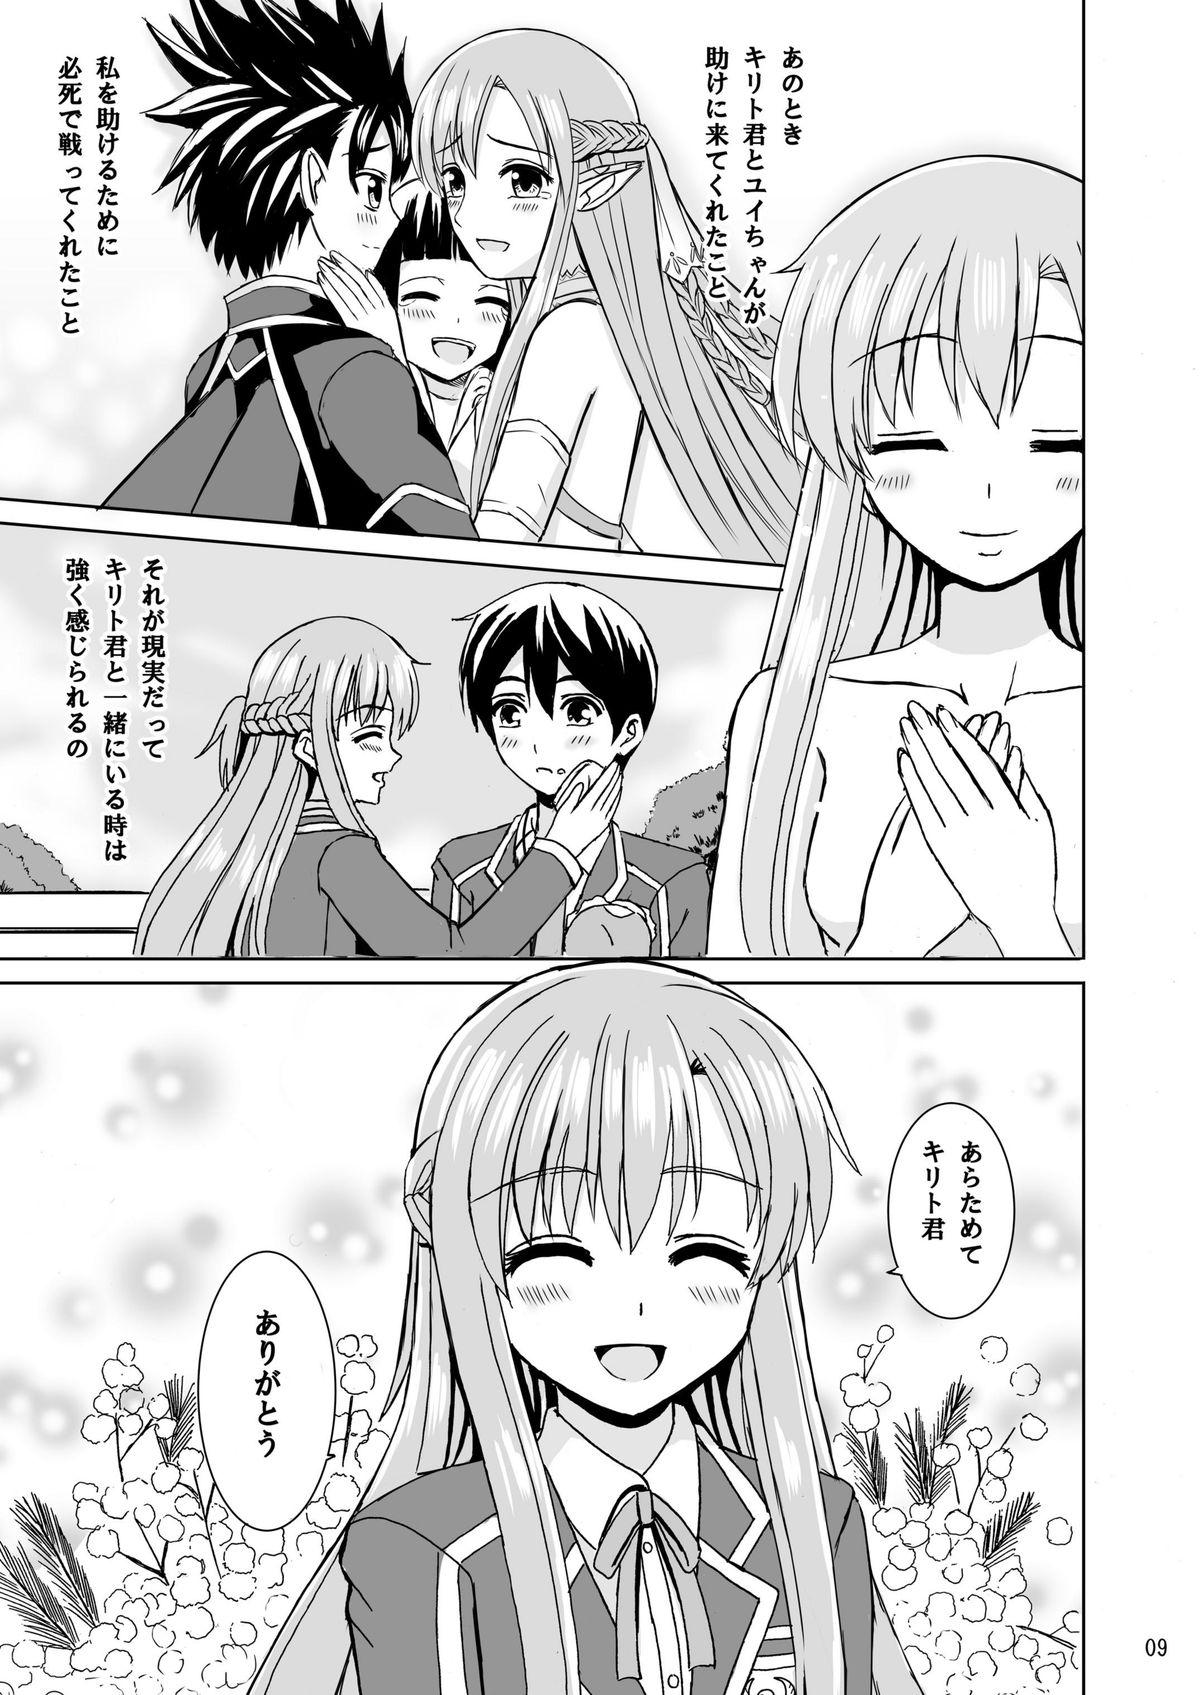 Hugetits Zutto Kimi to Issho ni - Sword art online Cocksucker - Page 9